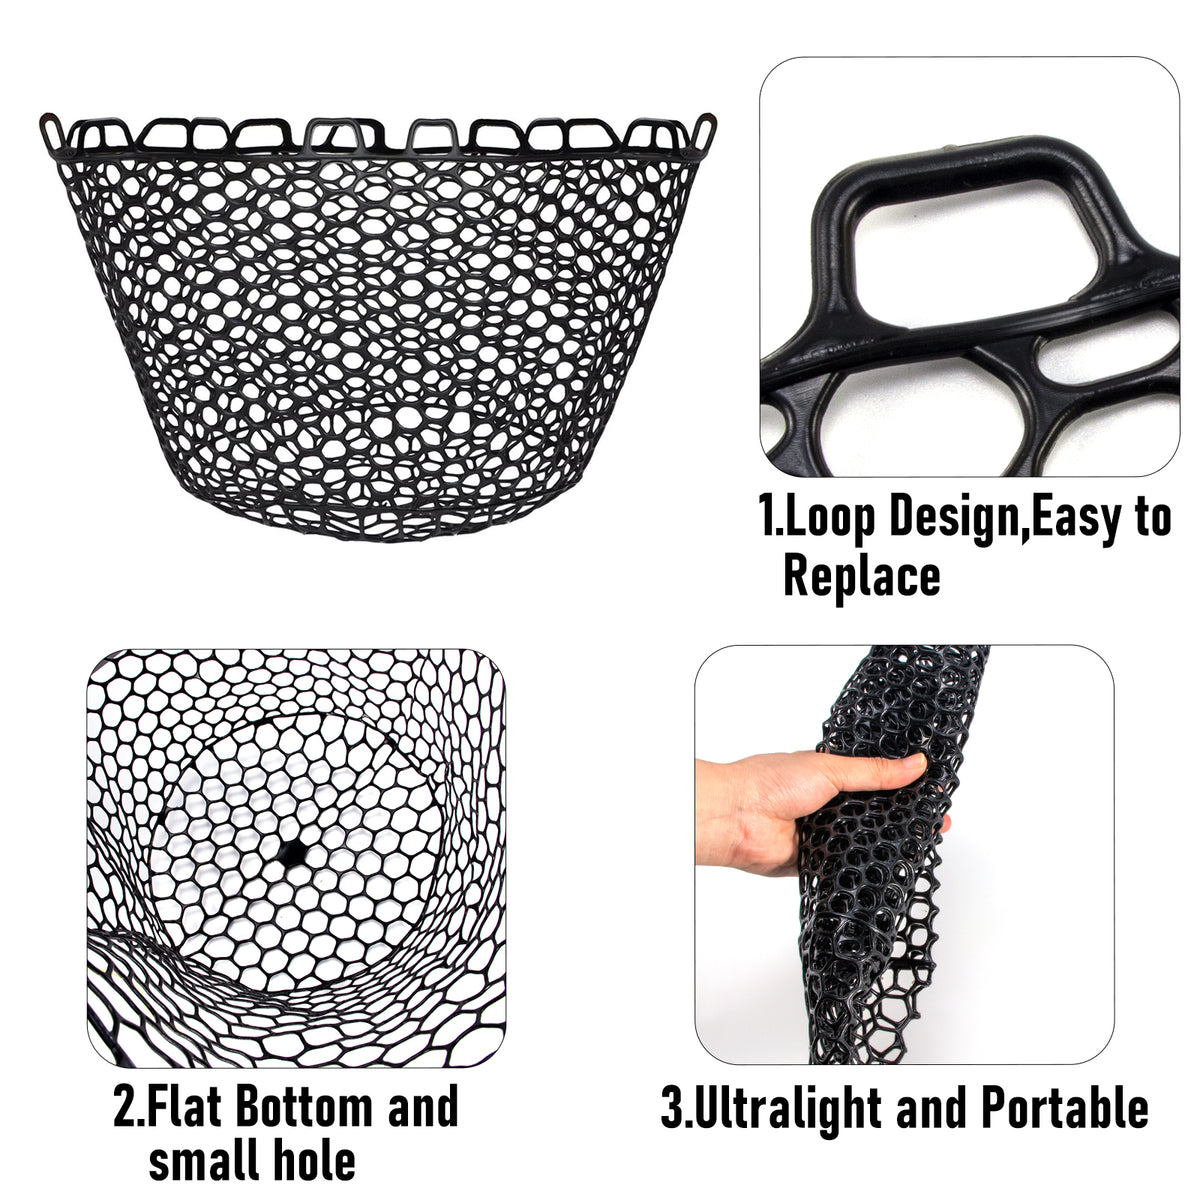  Replacement Silicone Fishing Nets